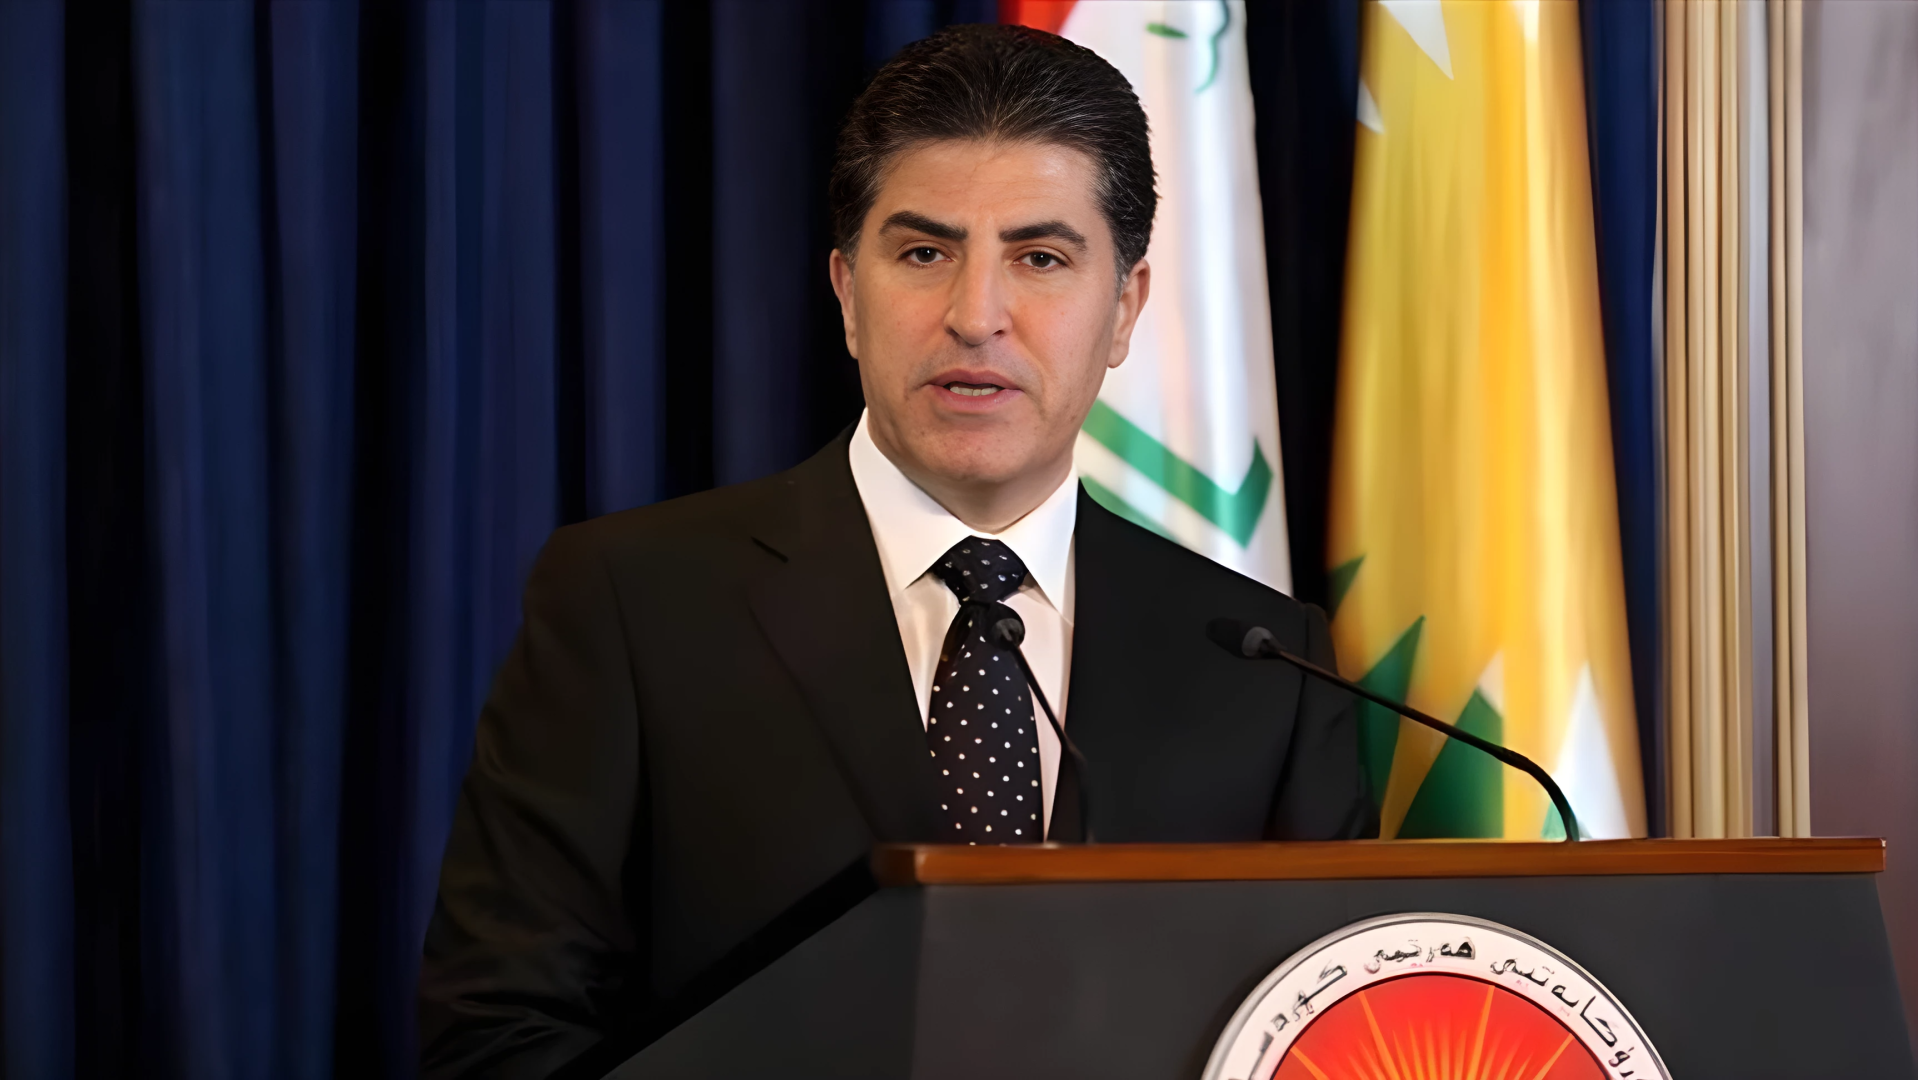 Kurdistan President offers condolences for hikers demise in floods